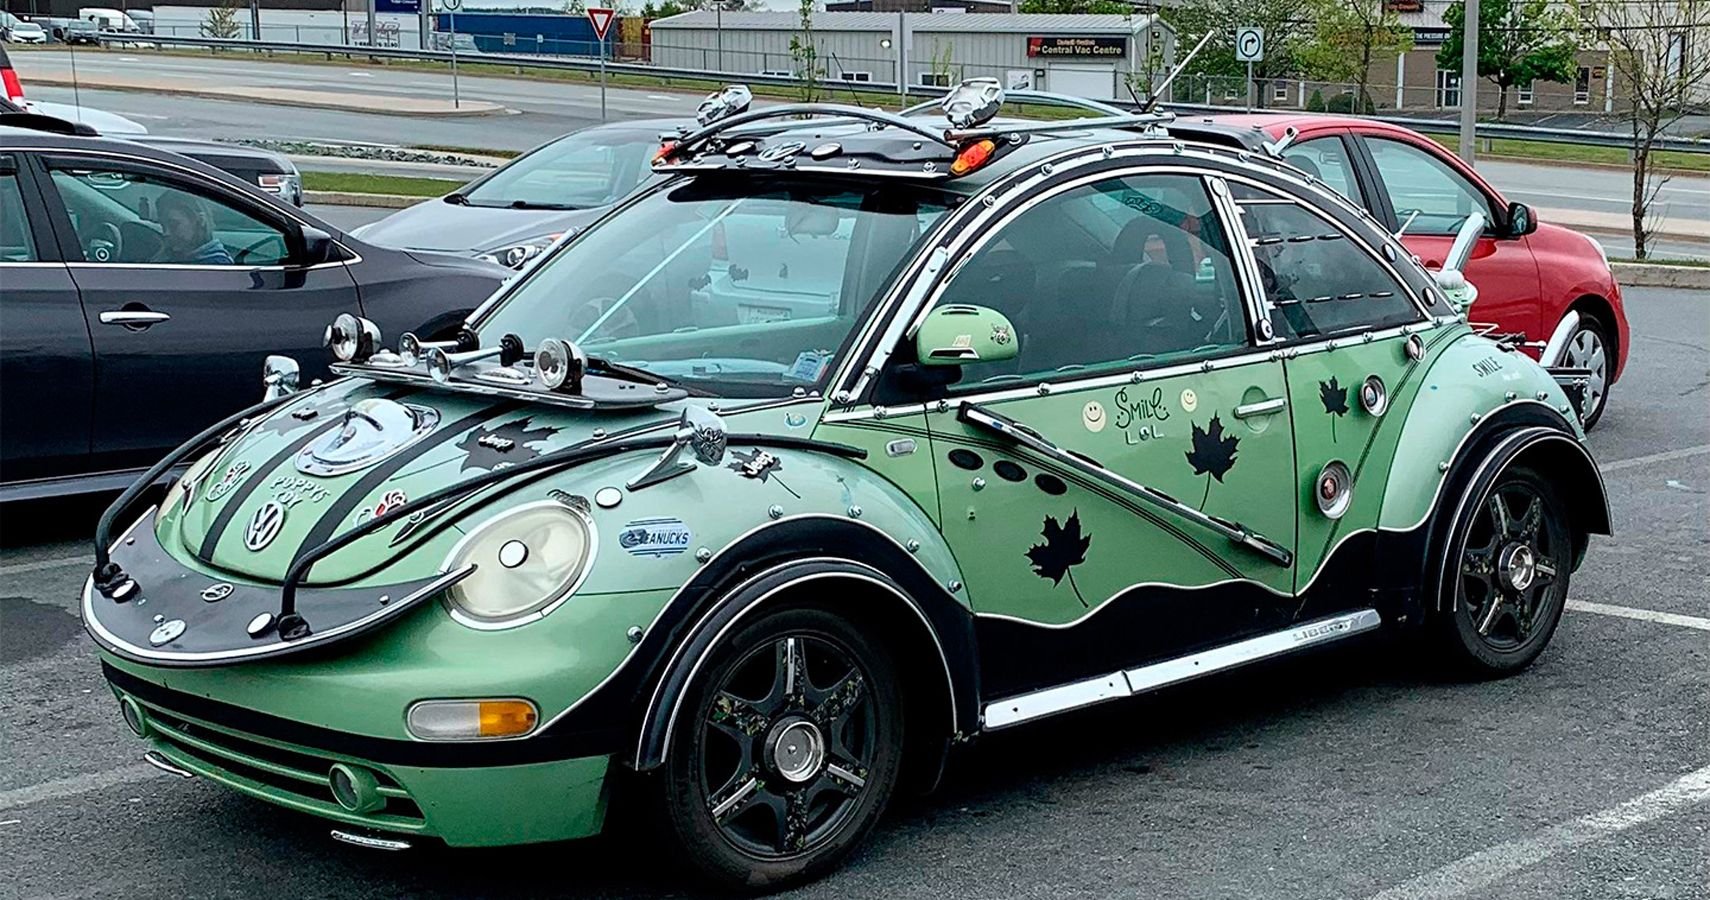 This Modified Volkswagen Beetle Raises So Many Questions